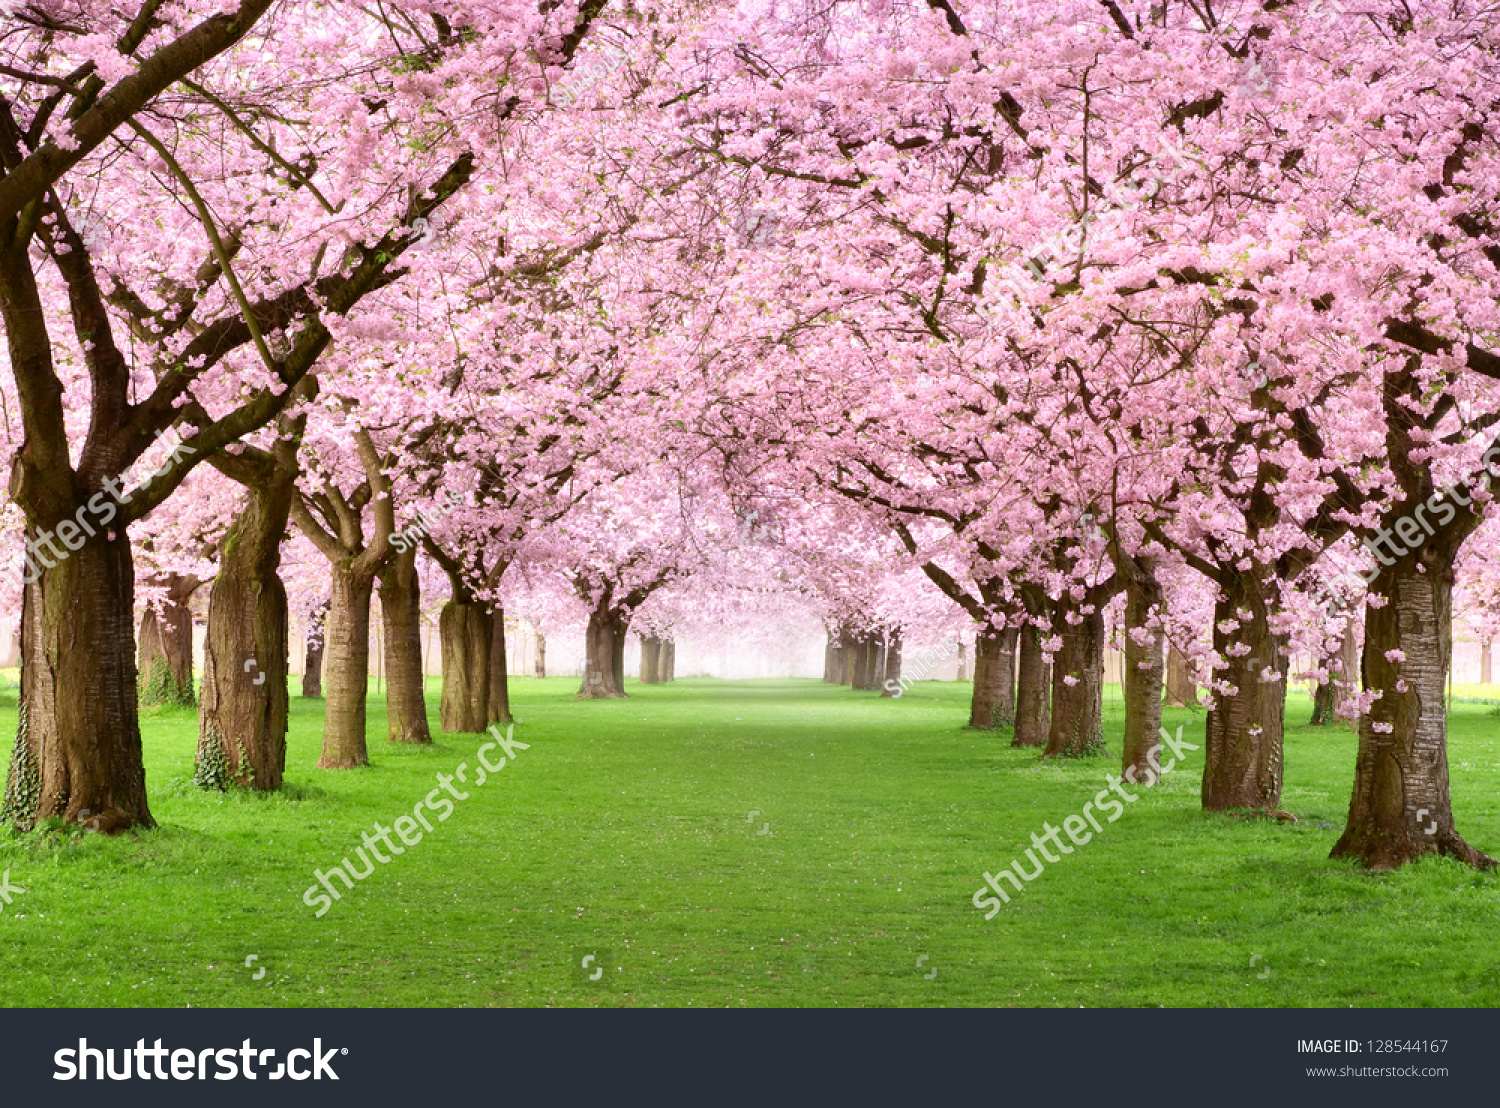 Ornamental garden with majestically blossoming large cherry trees on a fresh green lawn #128544167